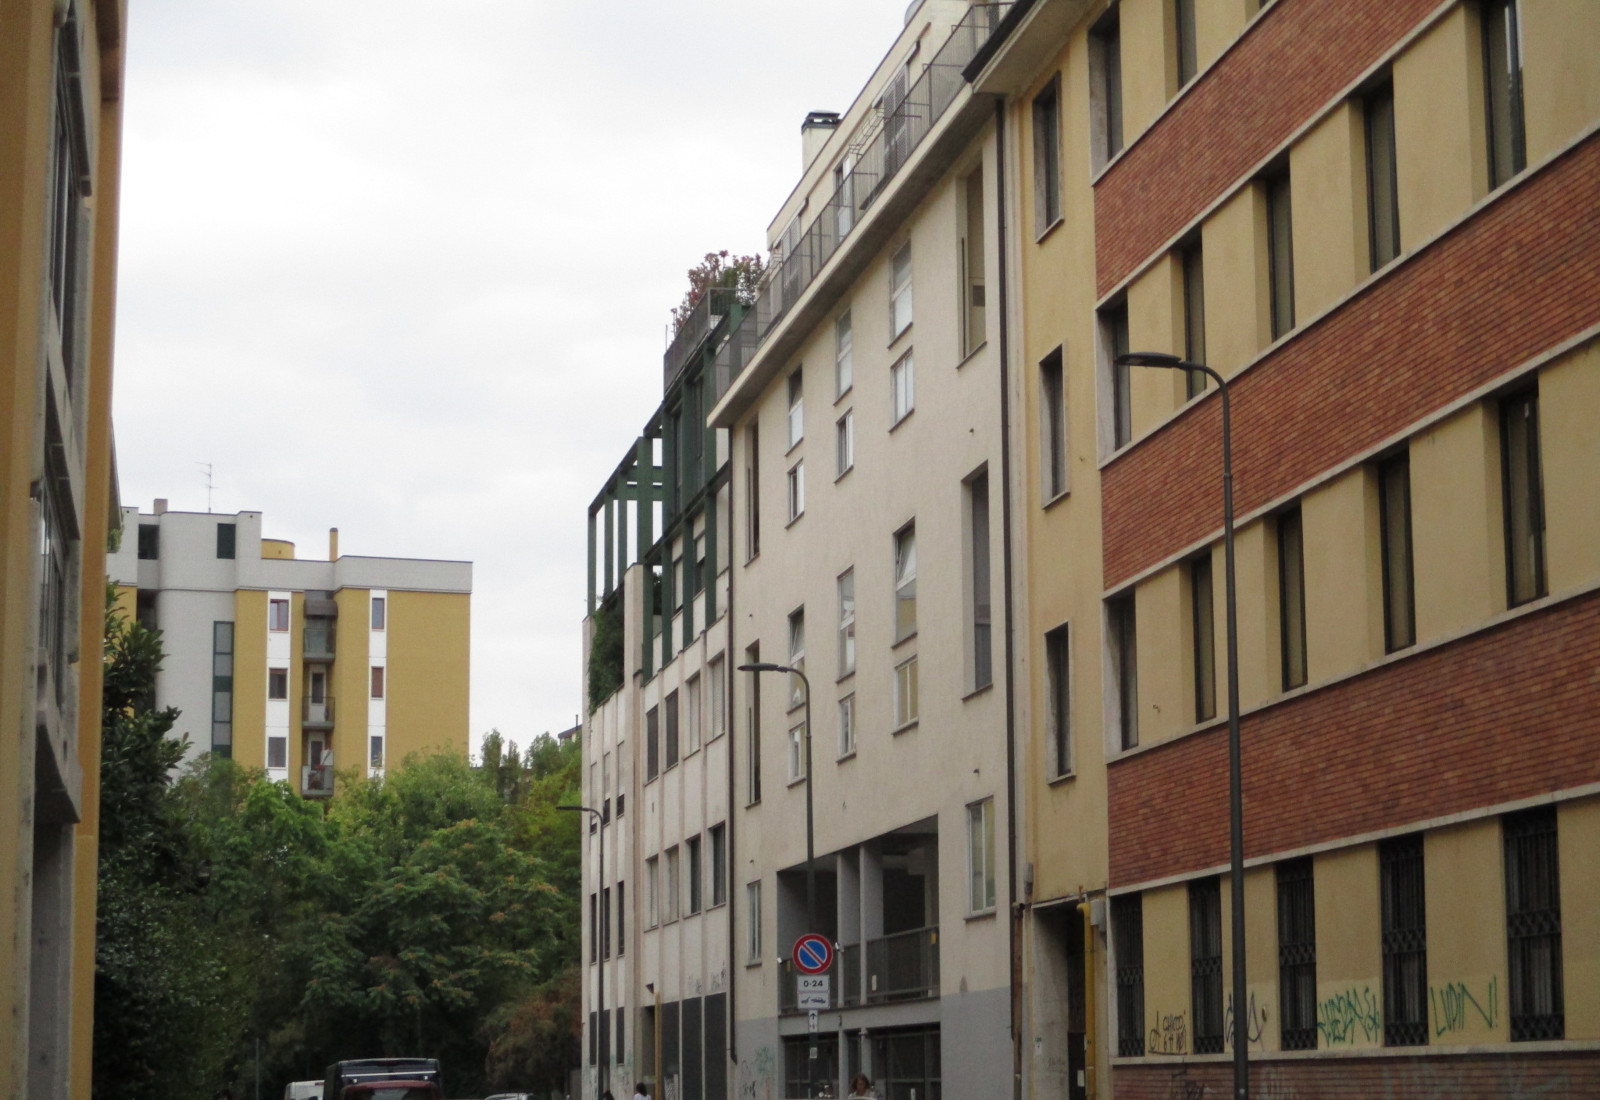 Residential ensemble, 20 A. Ponti street, Milan - View of the current situation